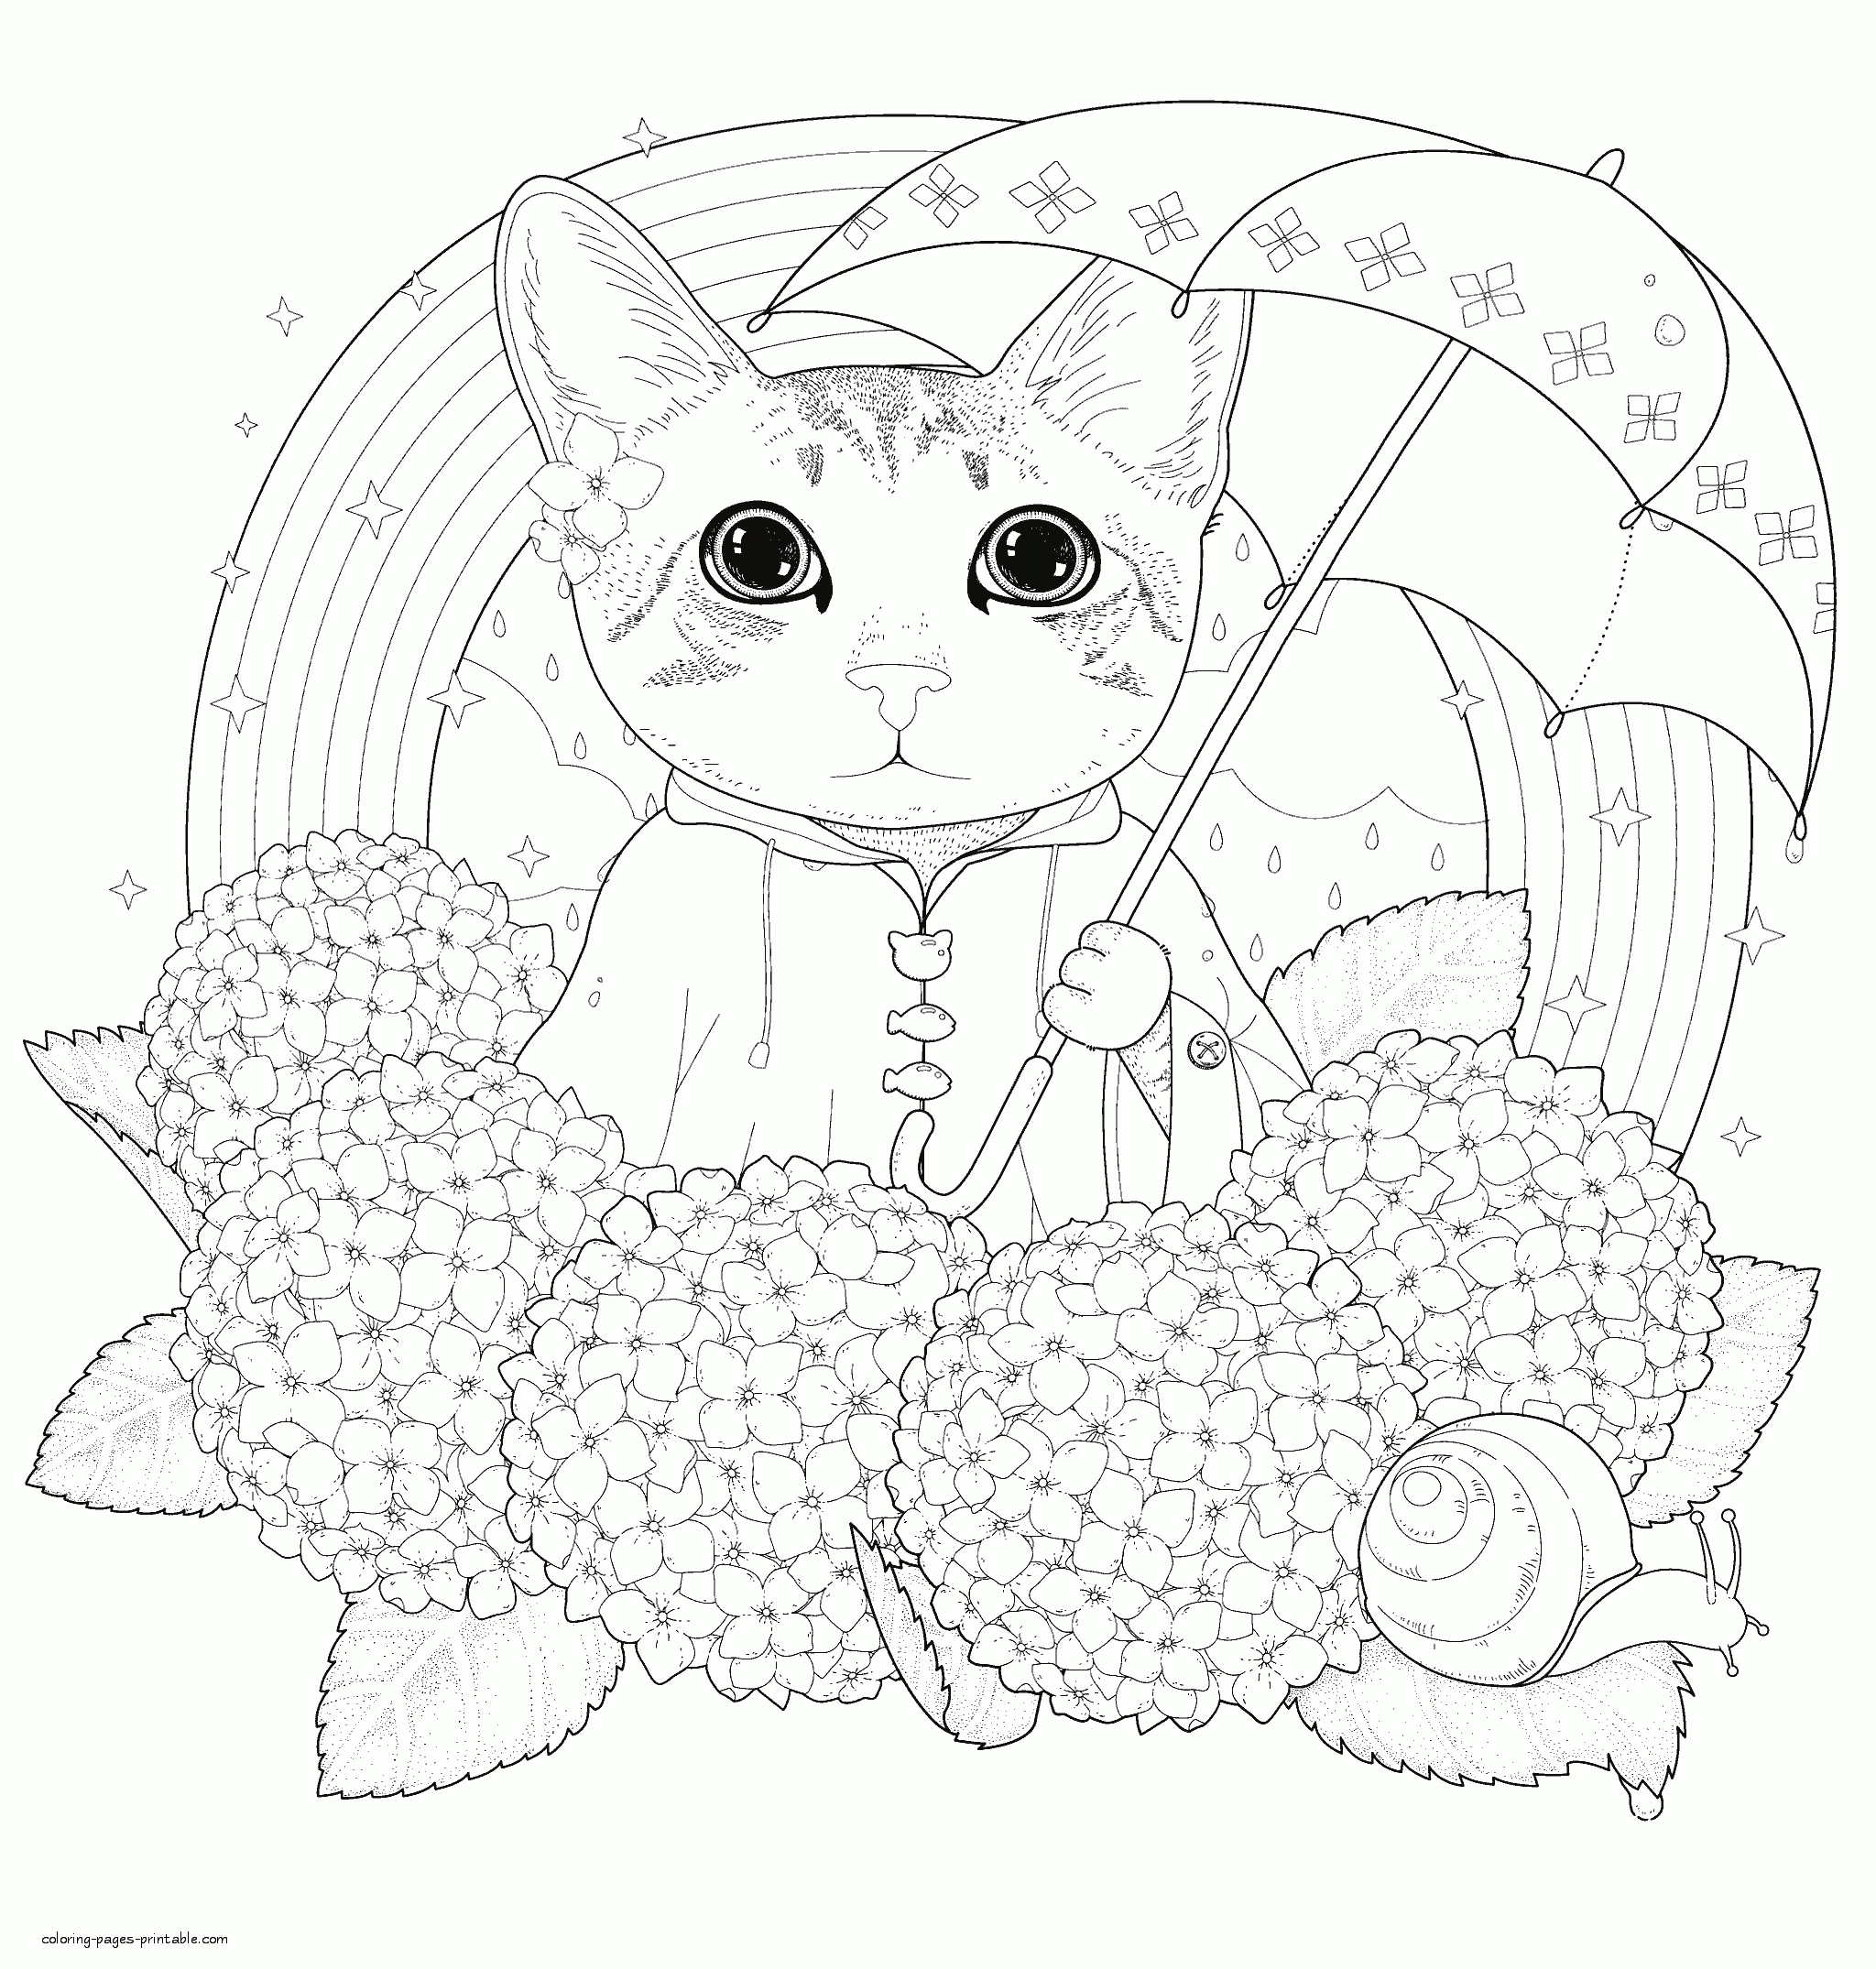 Animal Coloring Pages For Adults To Print |